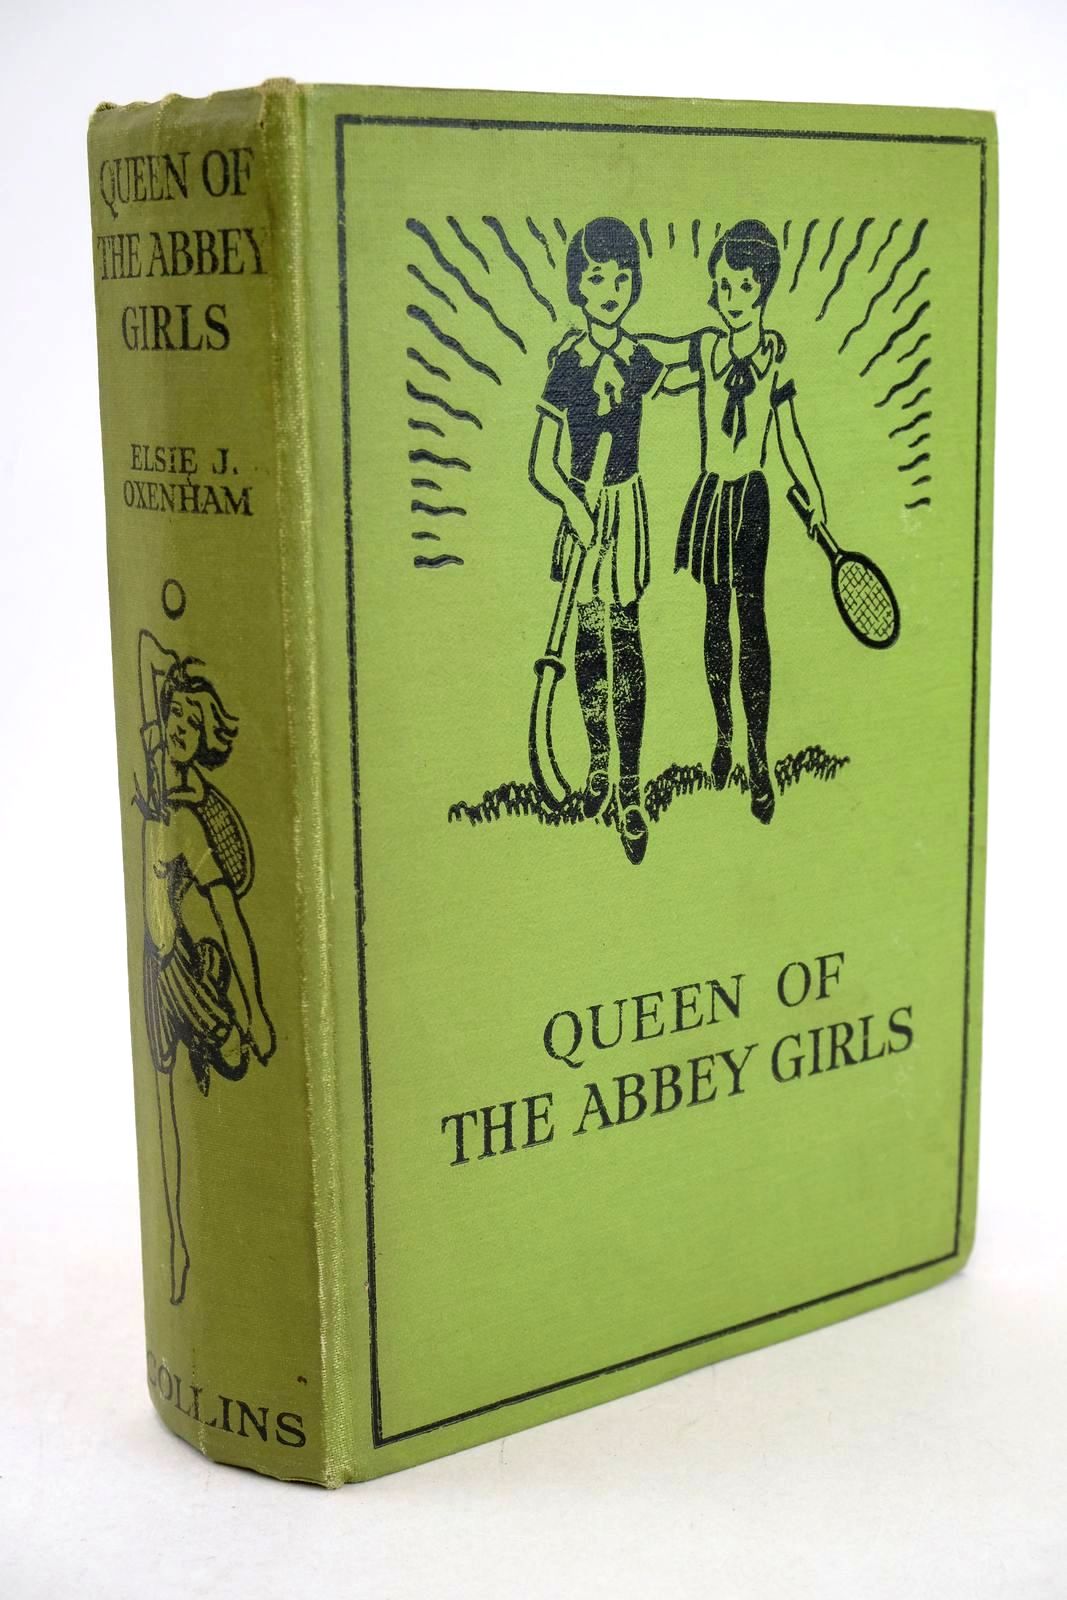 Photo of QUEEN OF THE ABBEY GIRLS written by Oxenham, Elsie J. illustrated by Kealey, E.J. published by Collins Clear-Type Press (STOCK CODE: 1327259)  for sale by Stella & Rose's Books